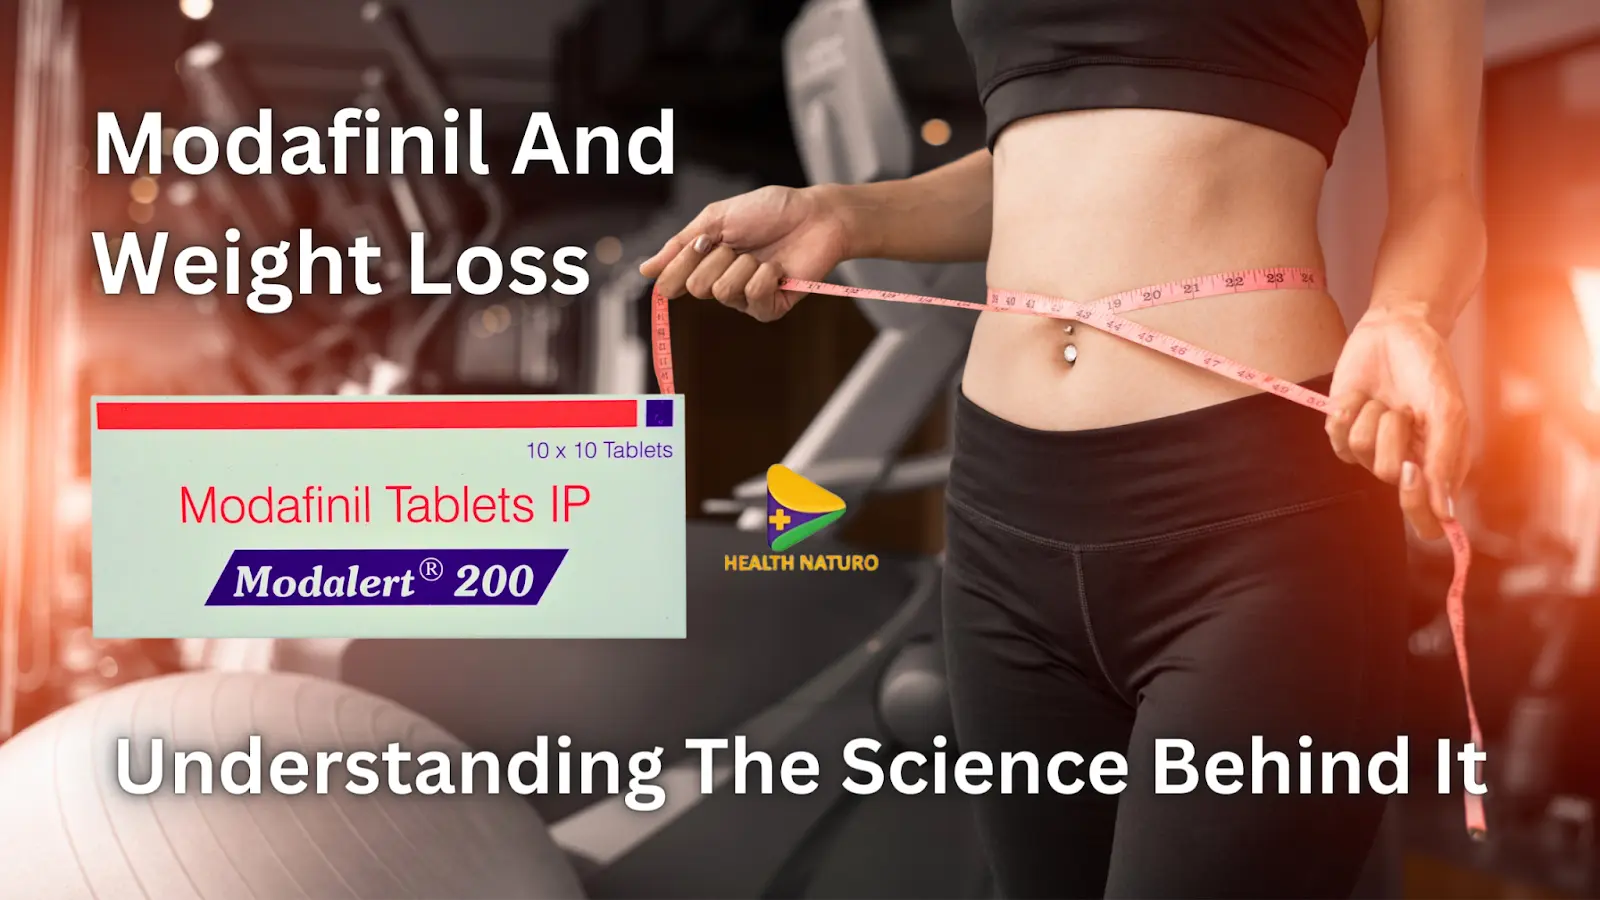 Modafinil And Weight Loss: Understanding The Science Behind It